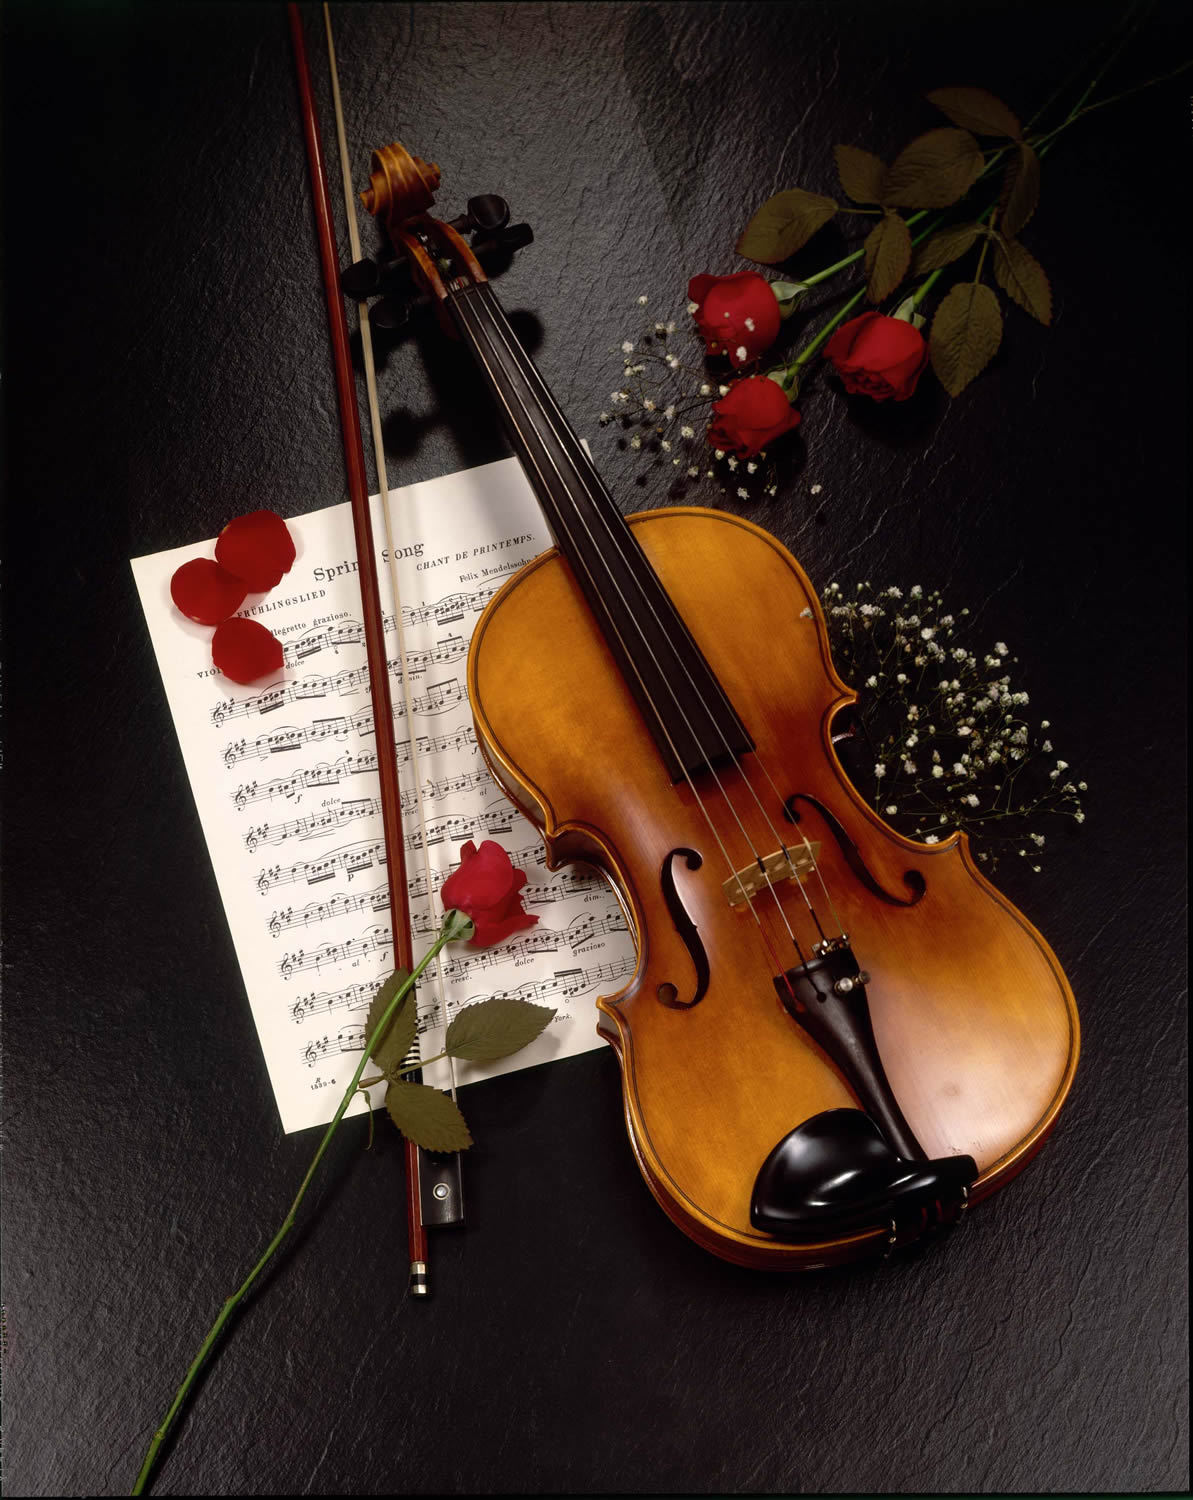 objects, violins, tools, black, music, flowers, roses